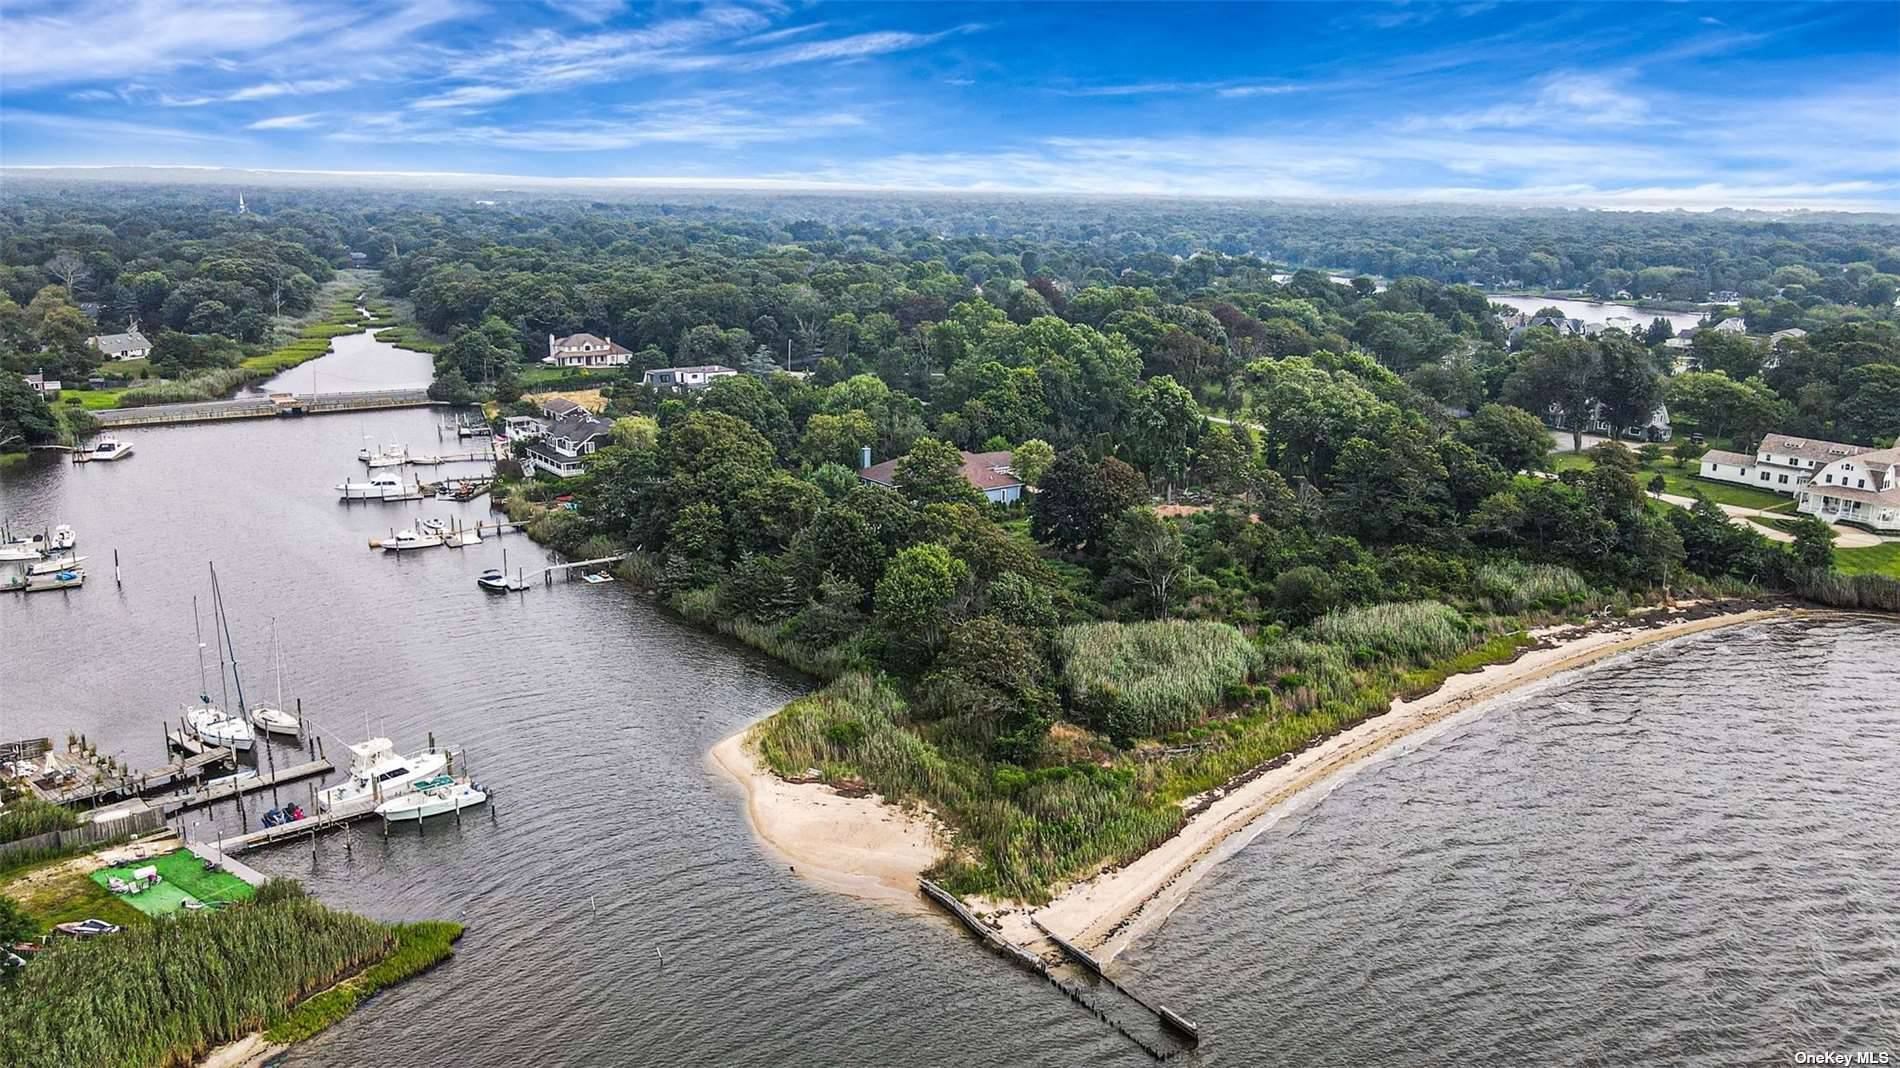 Discover a rare opportunity to own a slice of paradise in the heart of Desirable Center Moriches.